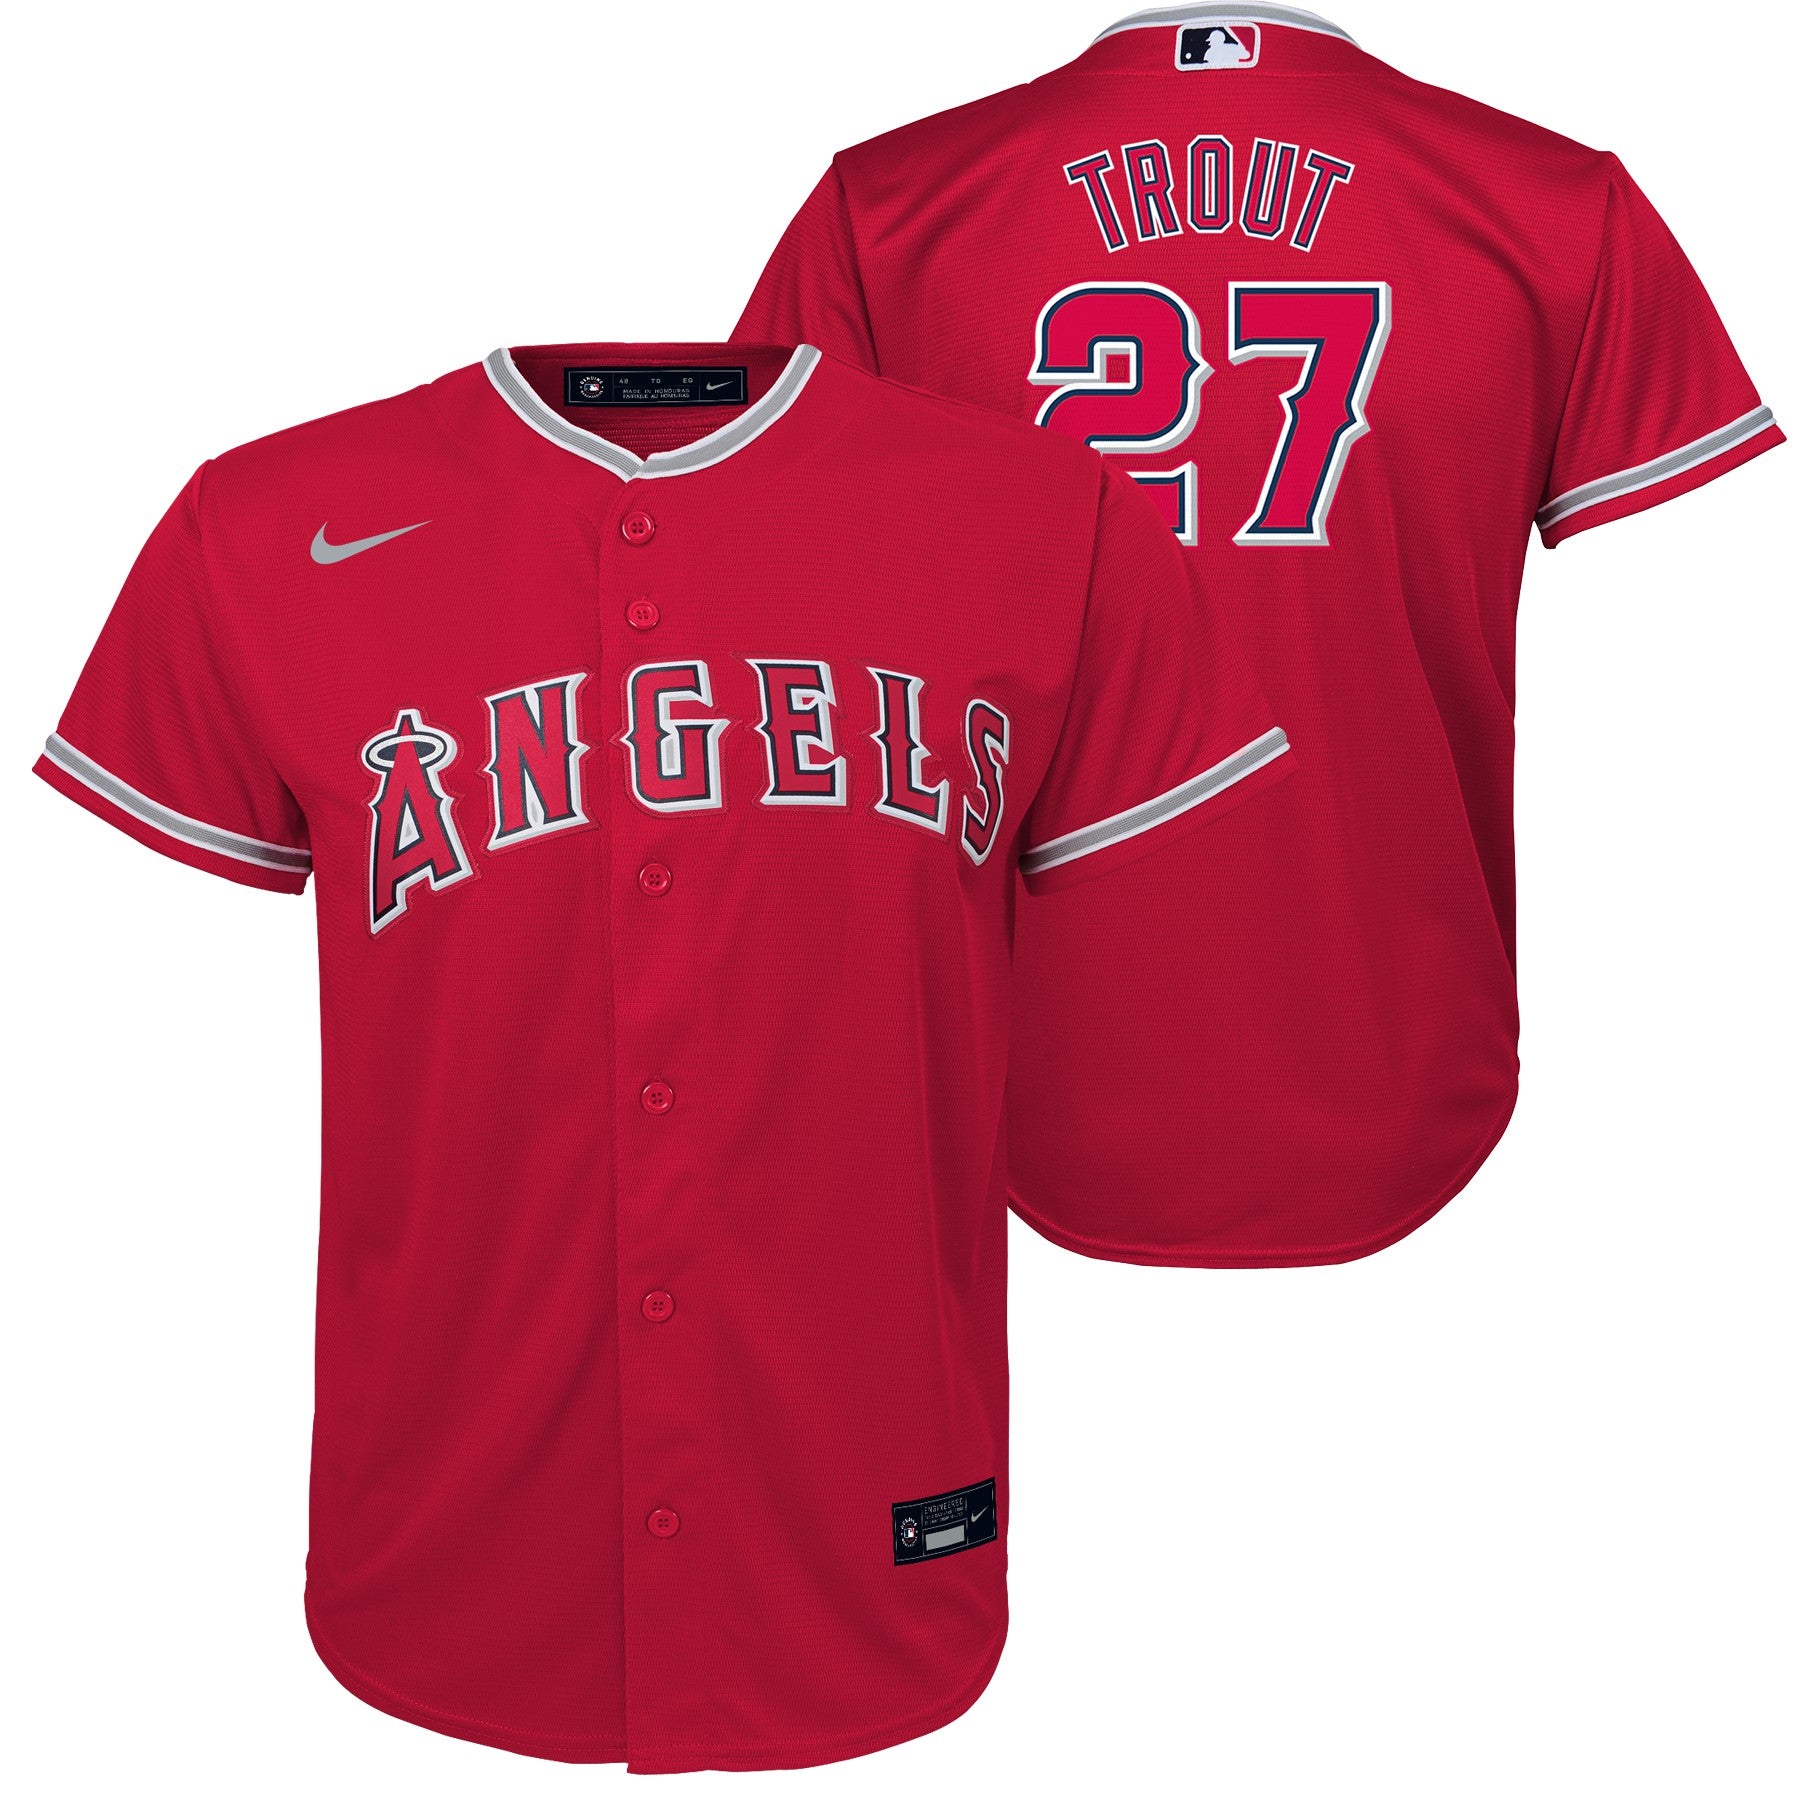 Toddler Nike Mike Trout White Los Angeles Angels Home Replica